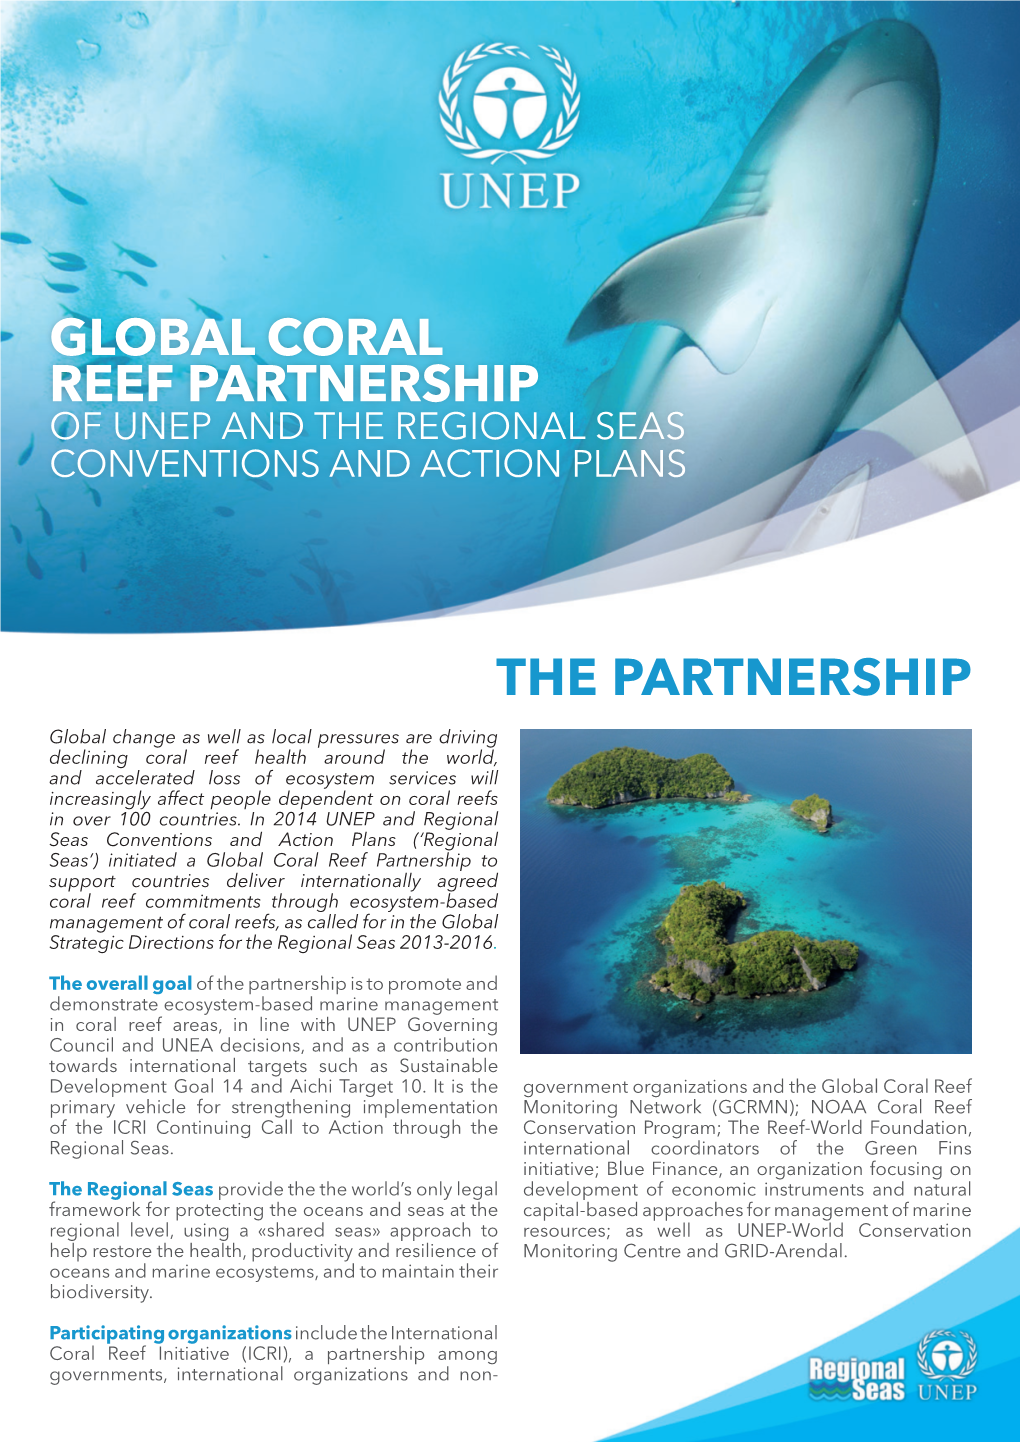 Global Coral Reef Partnership of UNEP and the Regional Seas Conventions and Action Plans